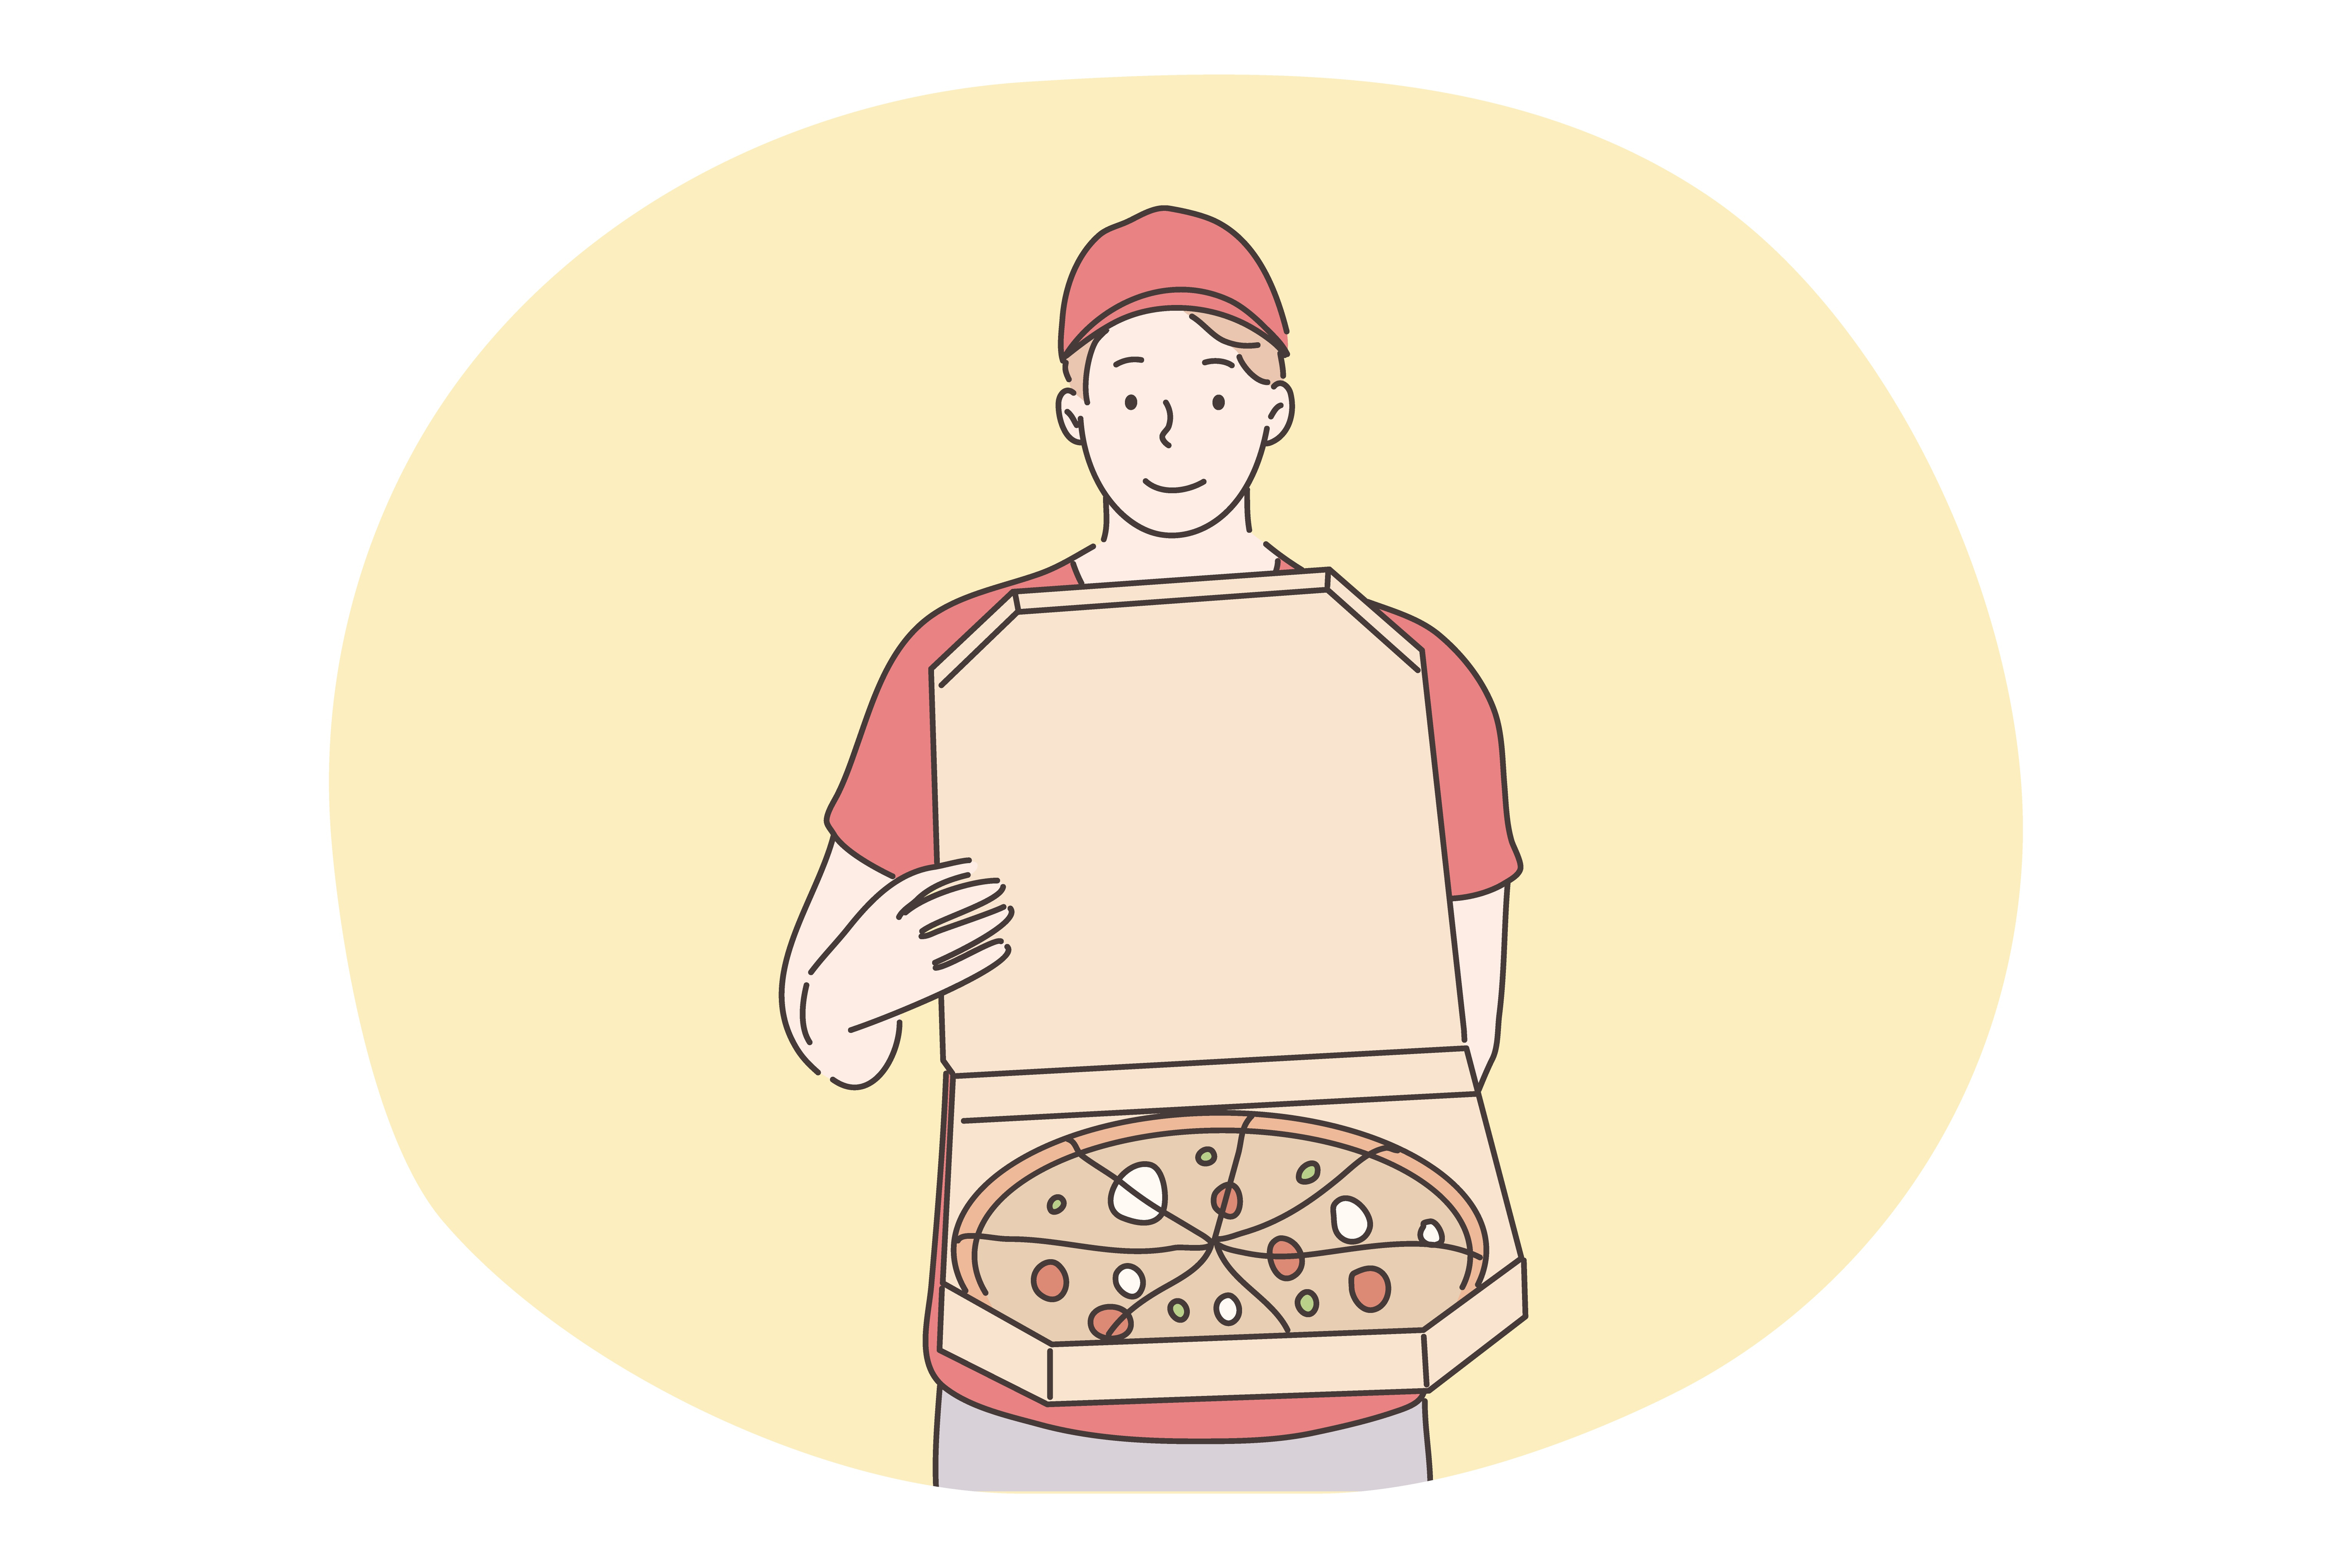 Pizza, home food delivery concept. Young smiling man boy courier supplier cartoon character standing with online order pizza cutting on slices. Fast supply service and ordering takeout illustration.. Pizza, home fastfood delivery concept.